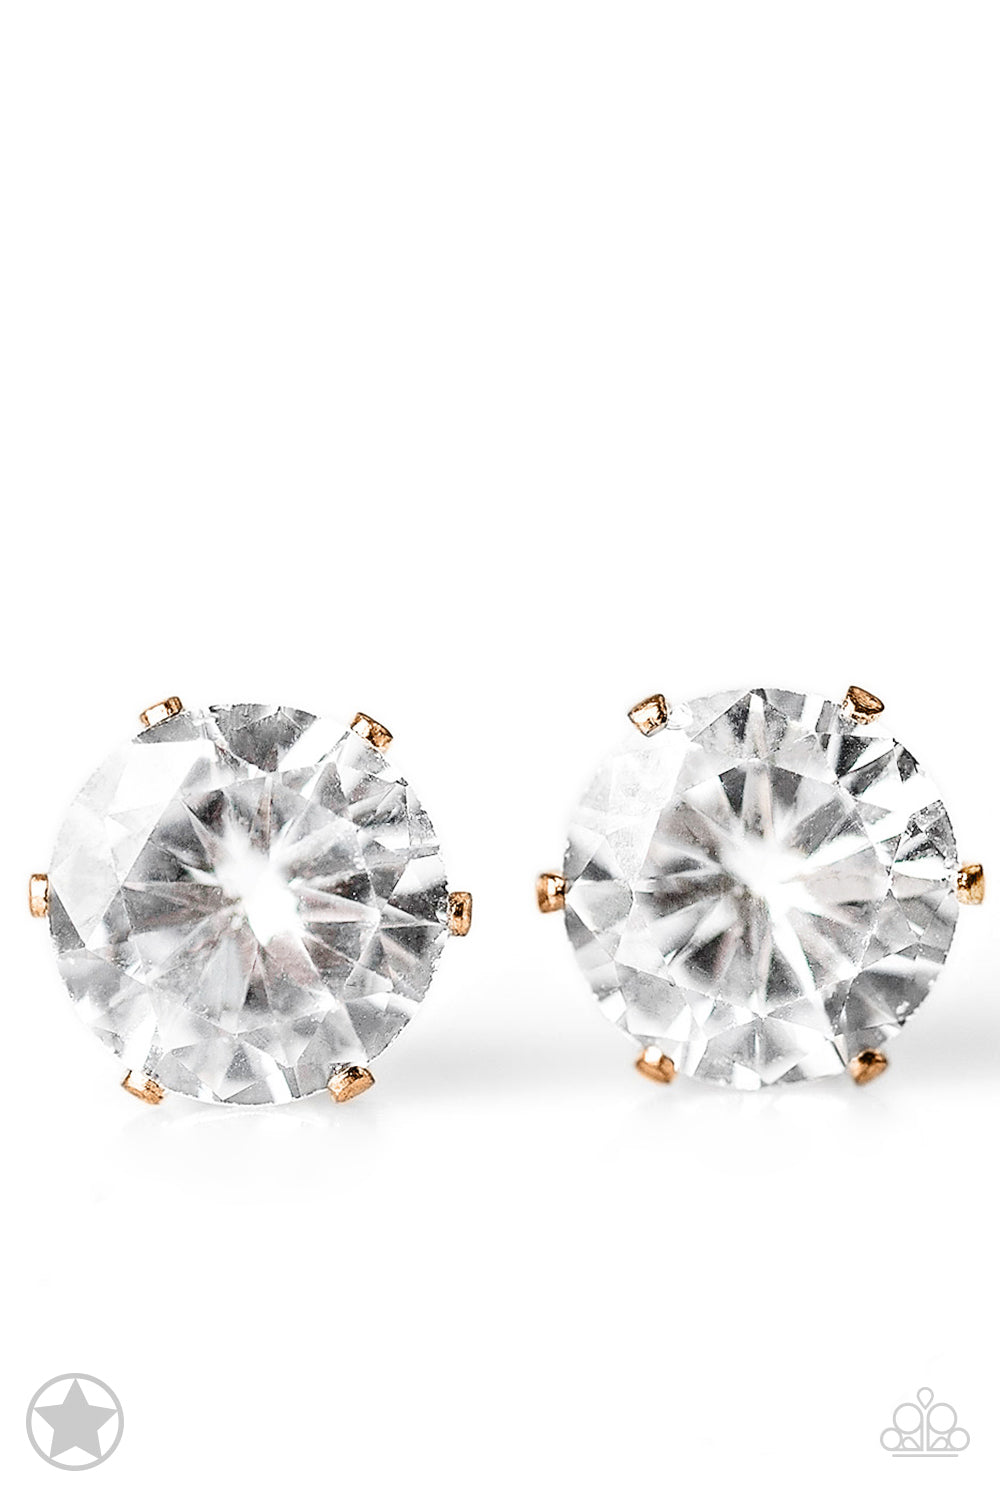 &lt;P&gt;A sparkling white rhinestone is nestled inside a classic gold frame for a timeless look. Earring attaches to a standard post fitting. &lt;/P&gt;  
&lt;P&gt; &lt;I&gt;  Sold as one pair of post earrings.
 &lt;/I&gt;  &lt;/P&gt;

&lt;img style=\&quot;height: 50px; width: 50px;\&quot; src=\&quot;https://d9b54x484lq62.cloudfront.net/paparazzi/shopping/images/517_staricon_1.jpg\&quot; alt=\&quot;BlockbusterLogo\&quot; align=\&quot;middle\&quot; /&gt;&lt;/p&gt;